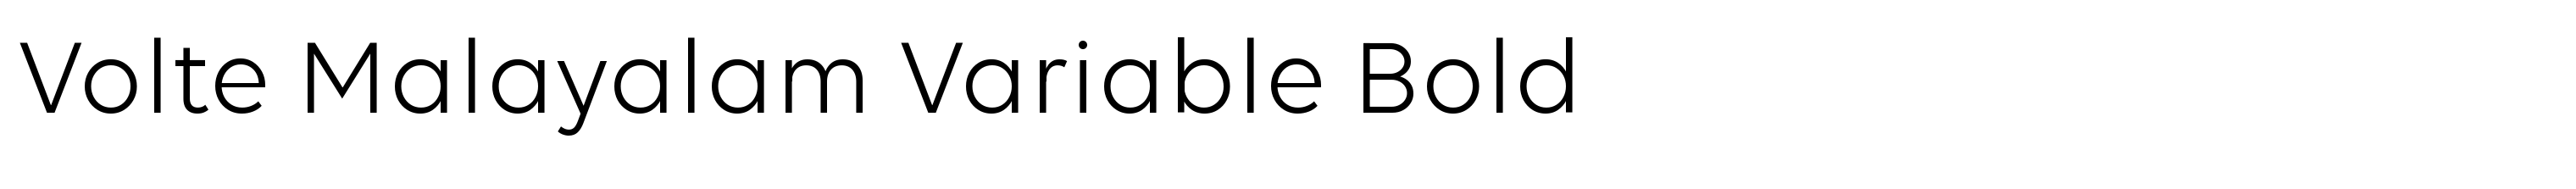 Volte Malayalam Variable Bold